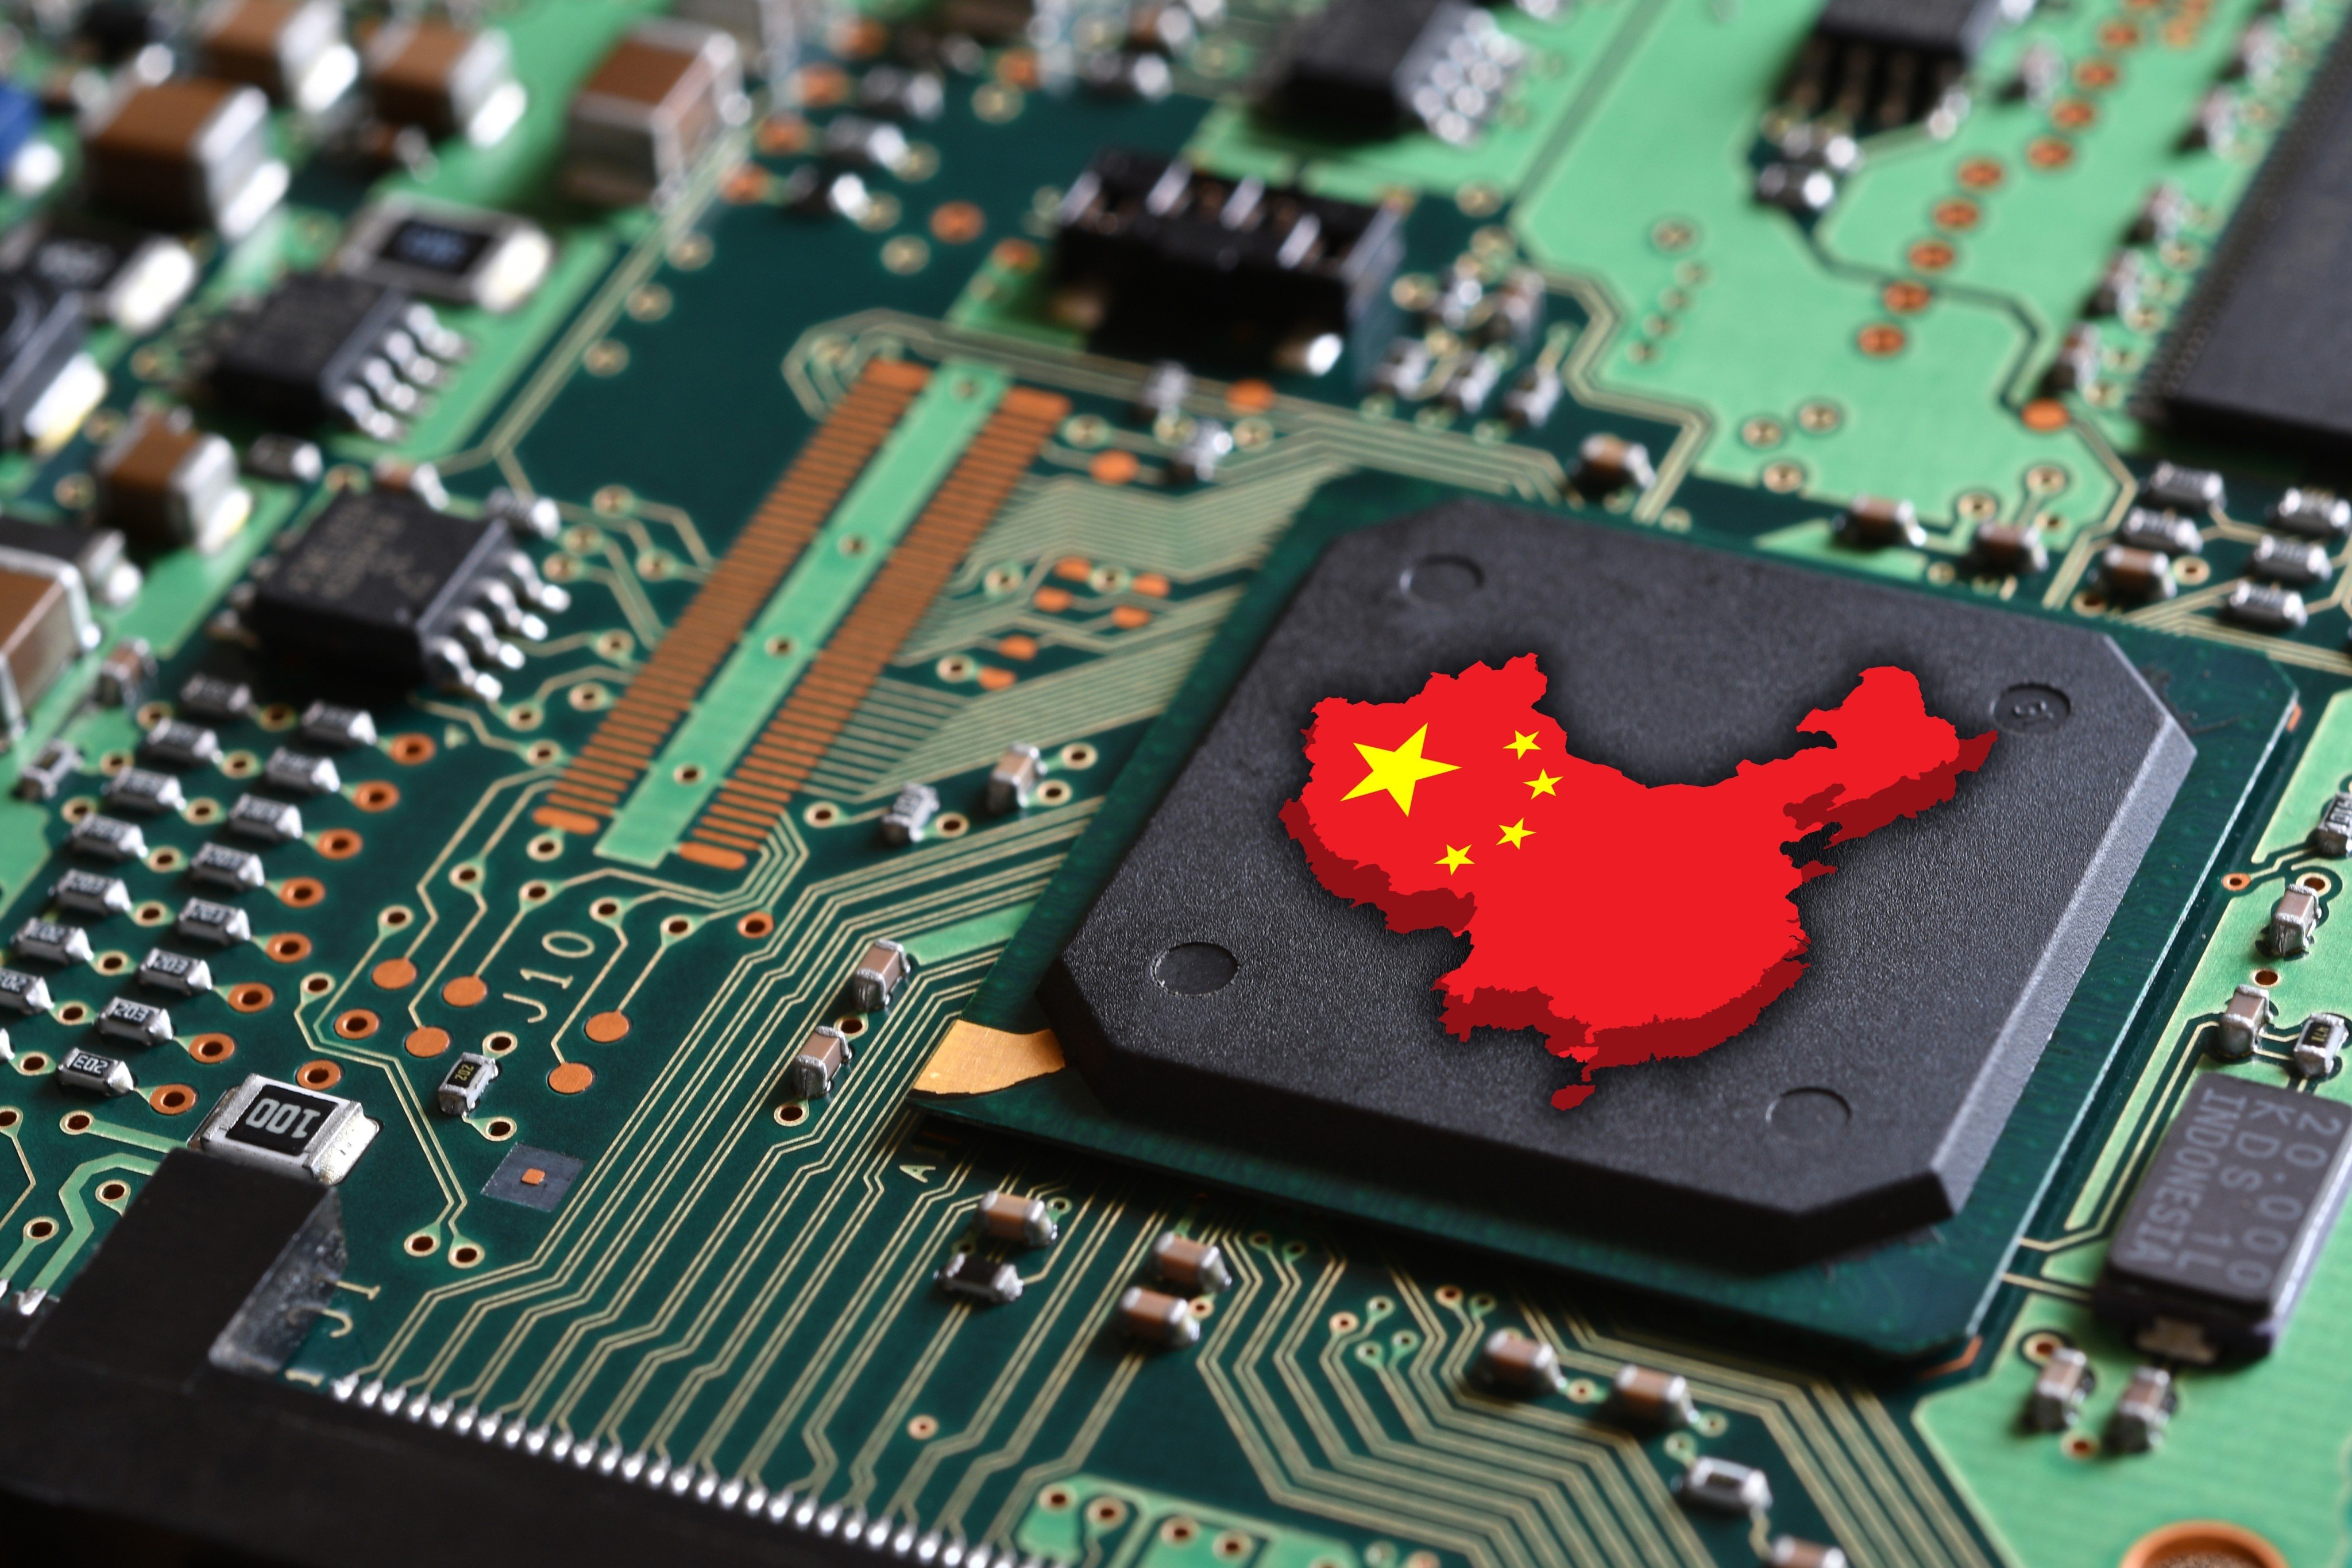 Ferroelectric materials are used to make chips for storage and sensing purposes that are critical to AI and other hi-tech areas where a tech war is playing out between China and the US. Photo: Shutterstock Images